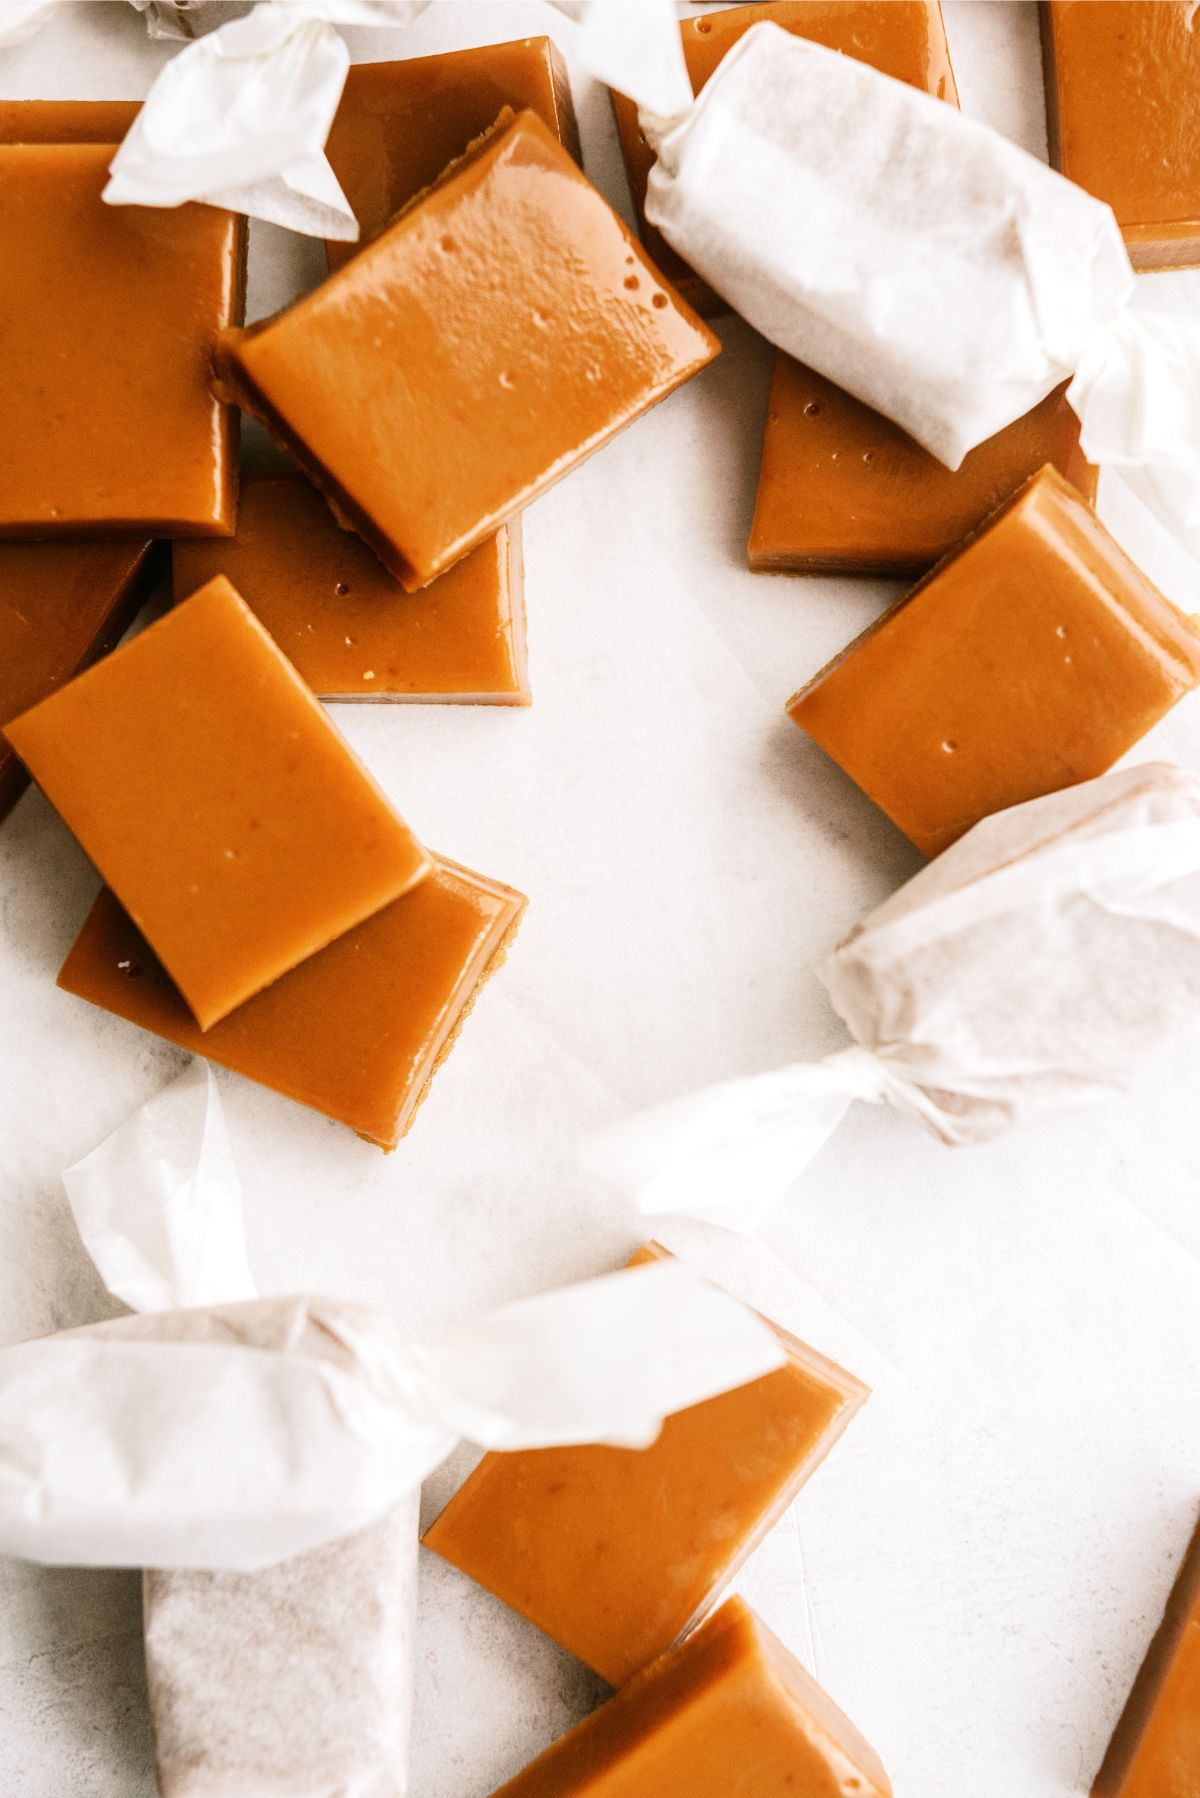 Homemade Caramels cut into rectangles with some wrapped in wax paper